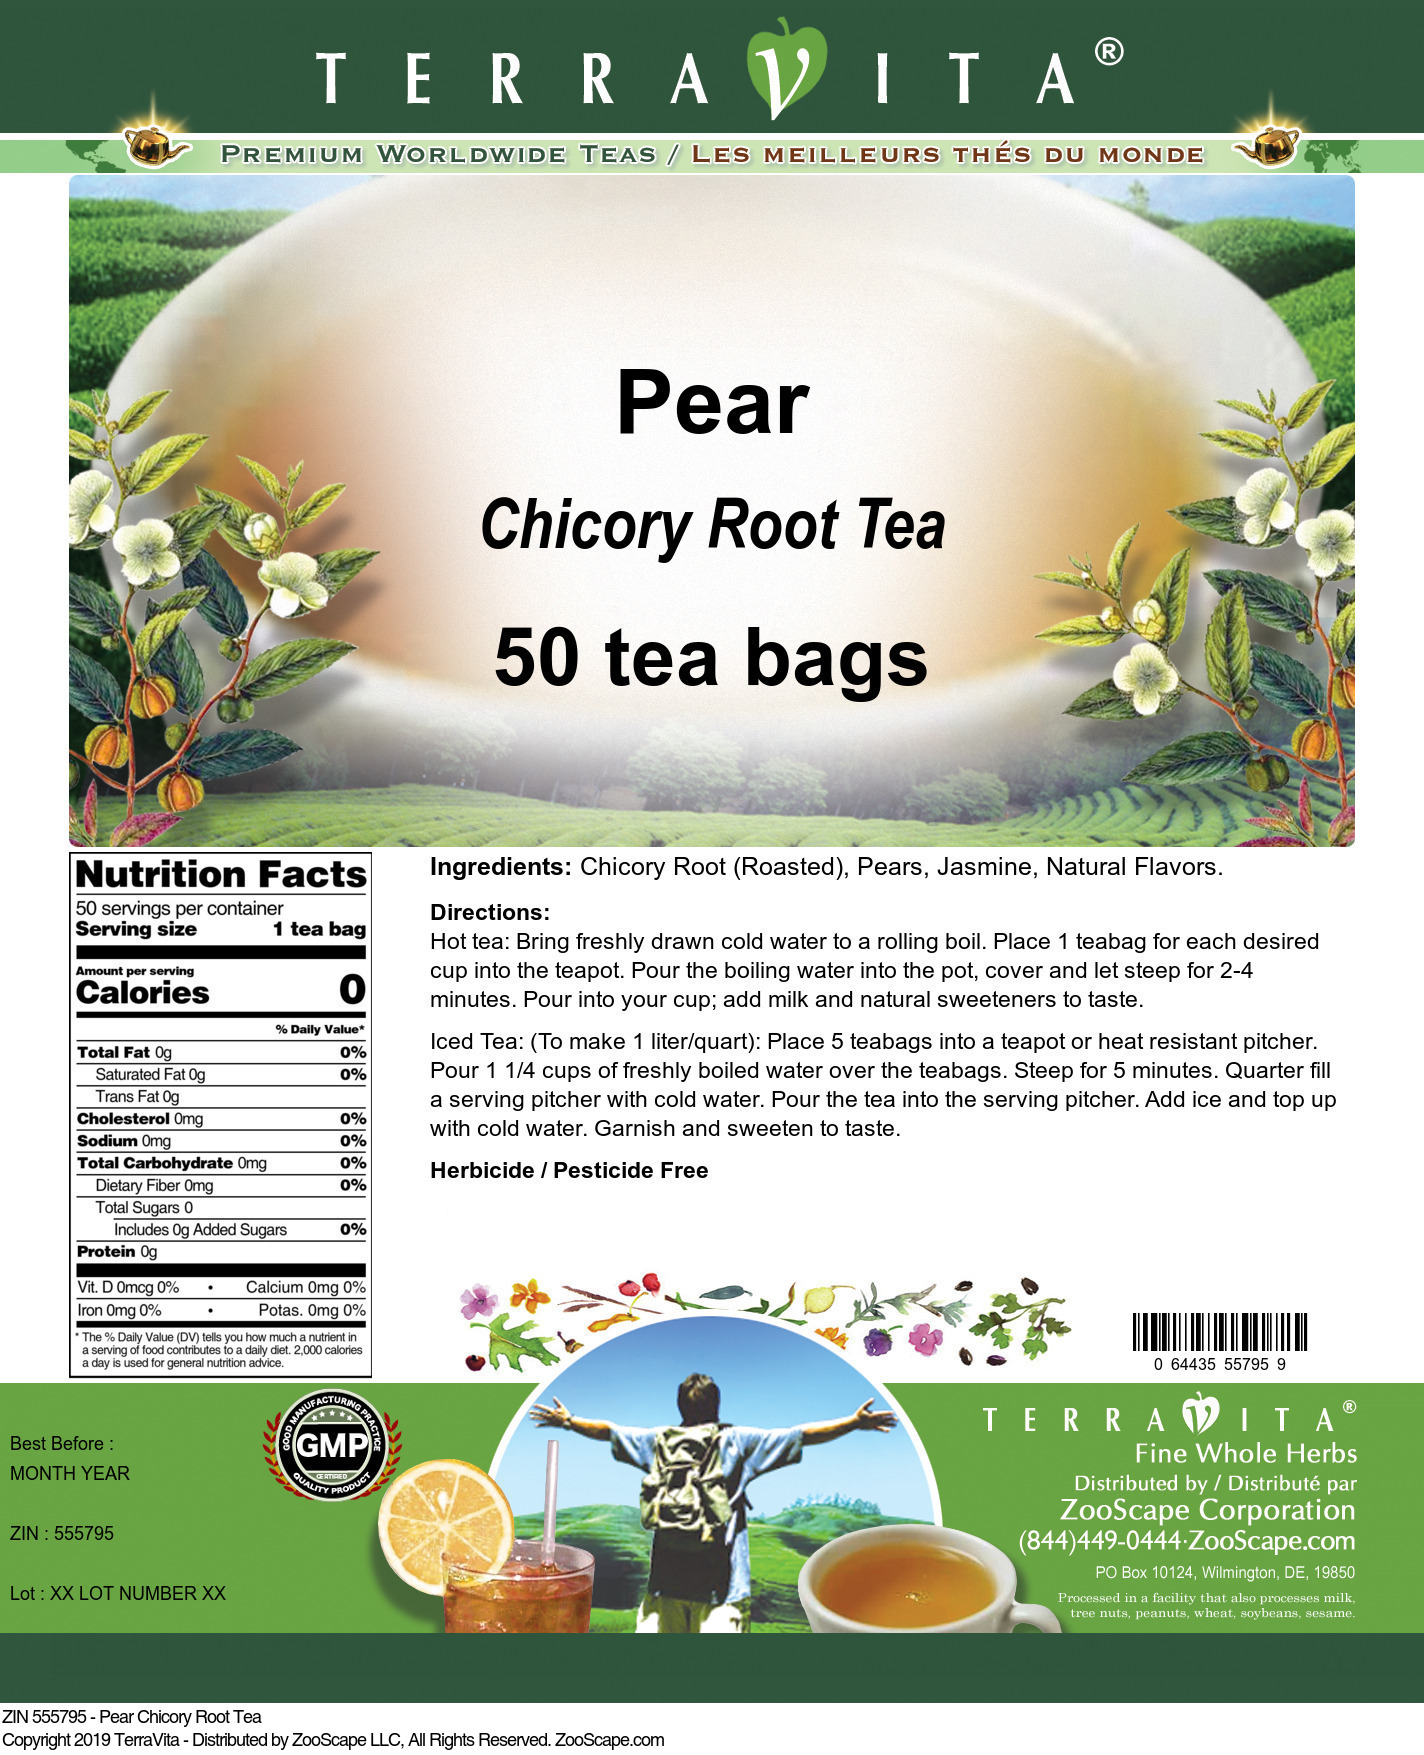 Pear Chicory Root Tea - Label